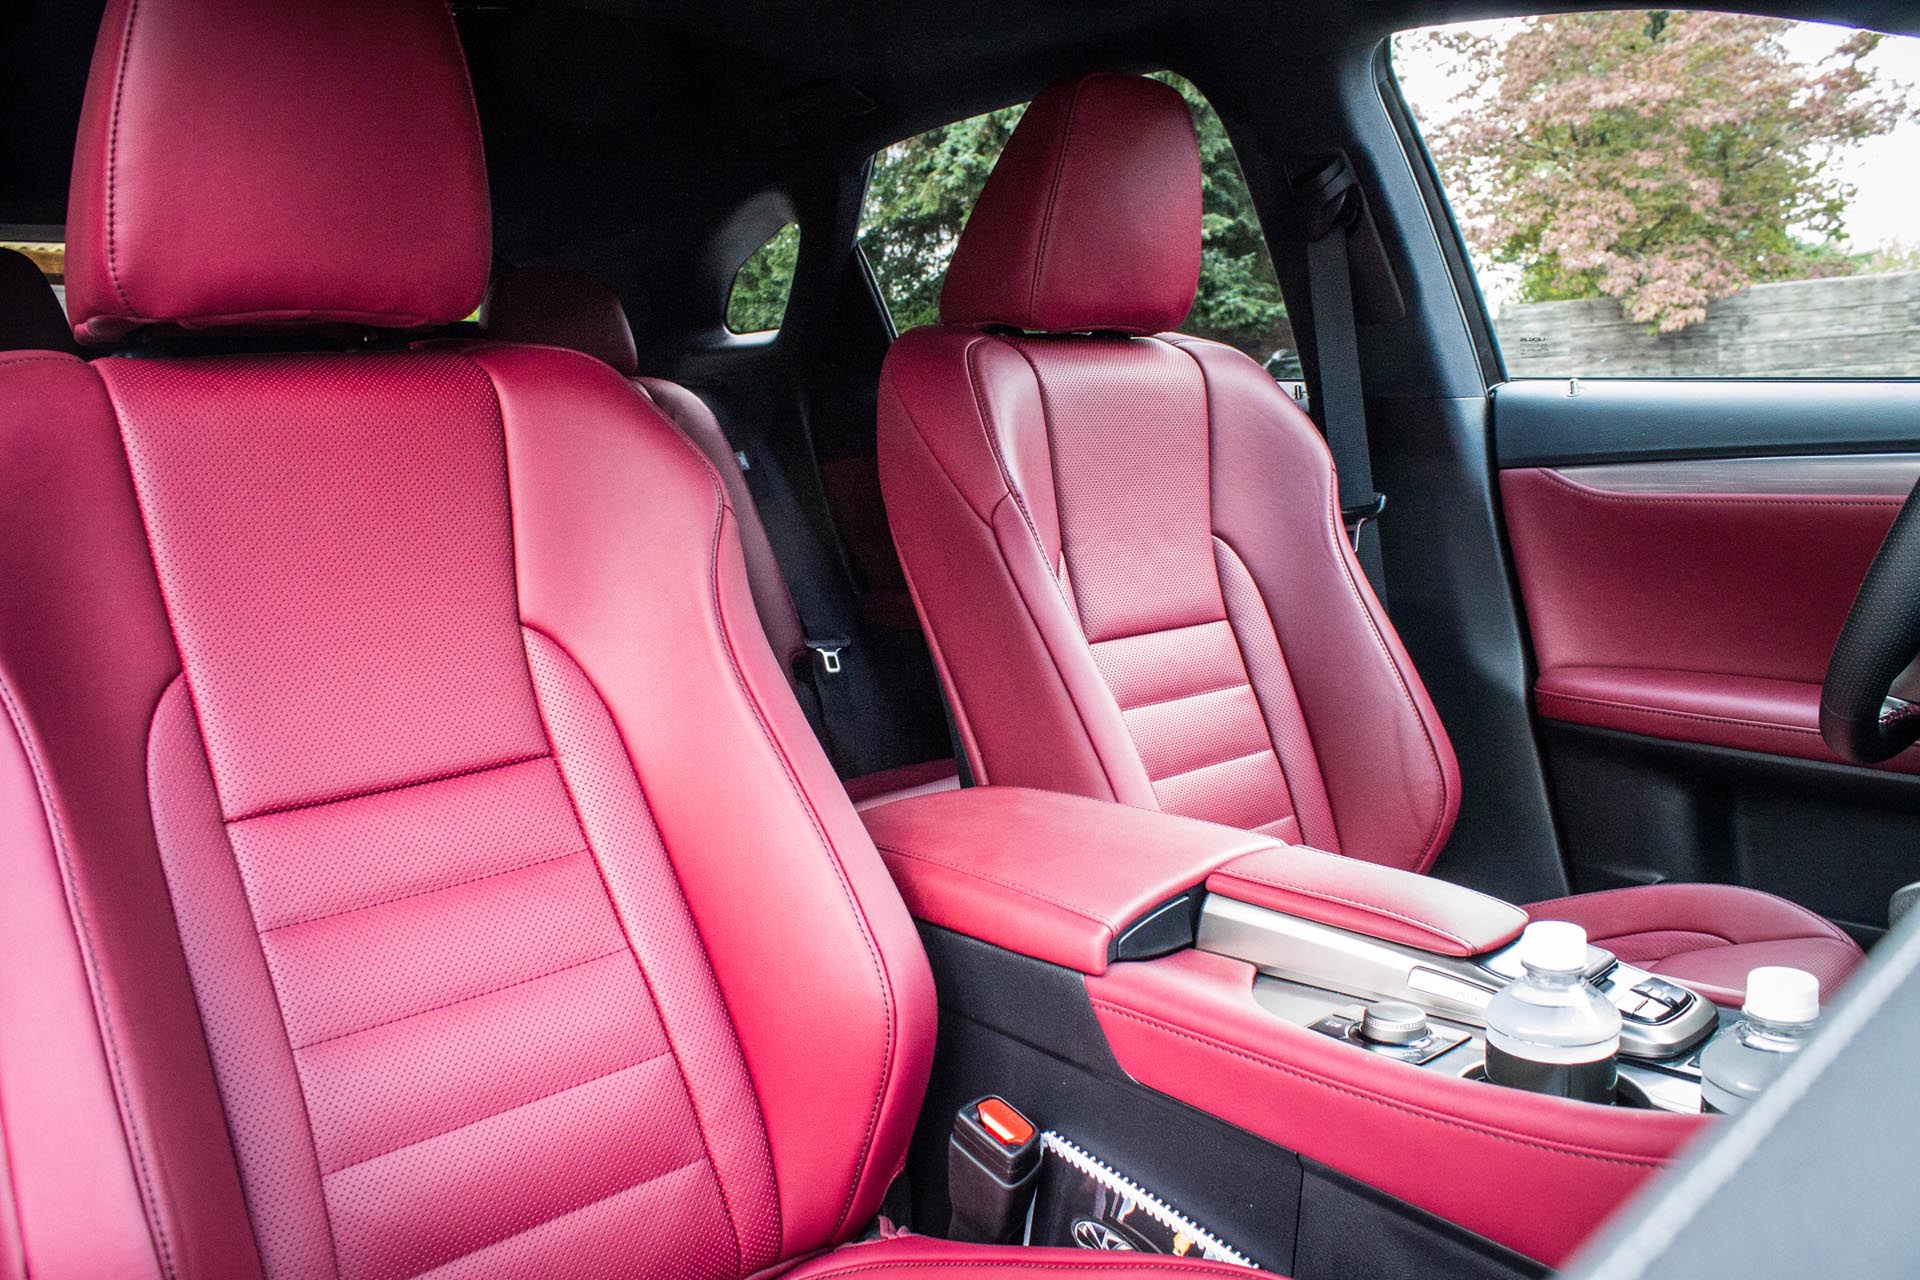 Inside, the new RX is still extremely comfortable, but it's got a great deal more style than any of its ancestors. The F-Sport seats in particular are excellent, deeply bolstered and still very comfortable. In red, they're both stylish and functional.